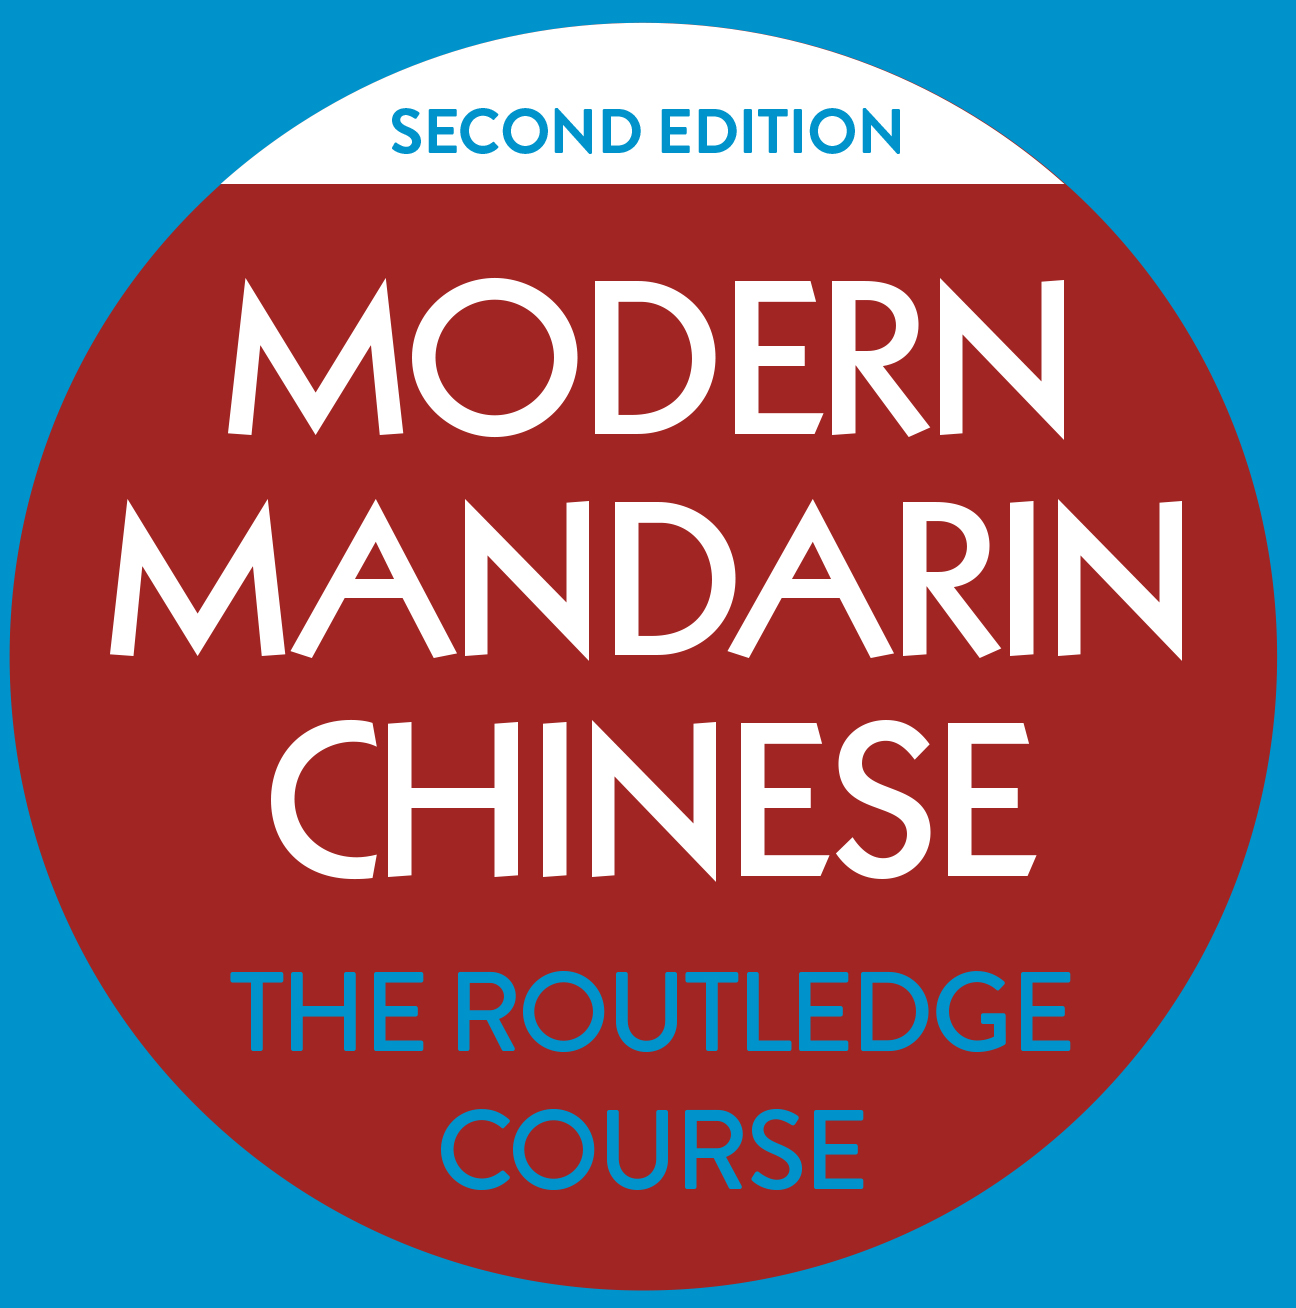 Modern Mandarin Chinese: The Routledge Course